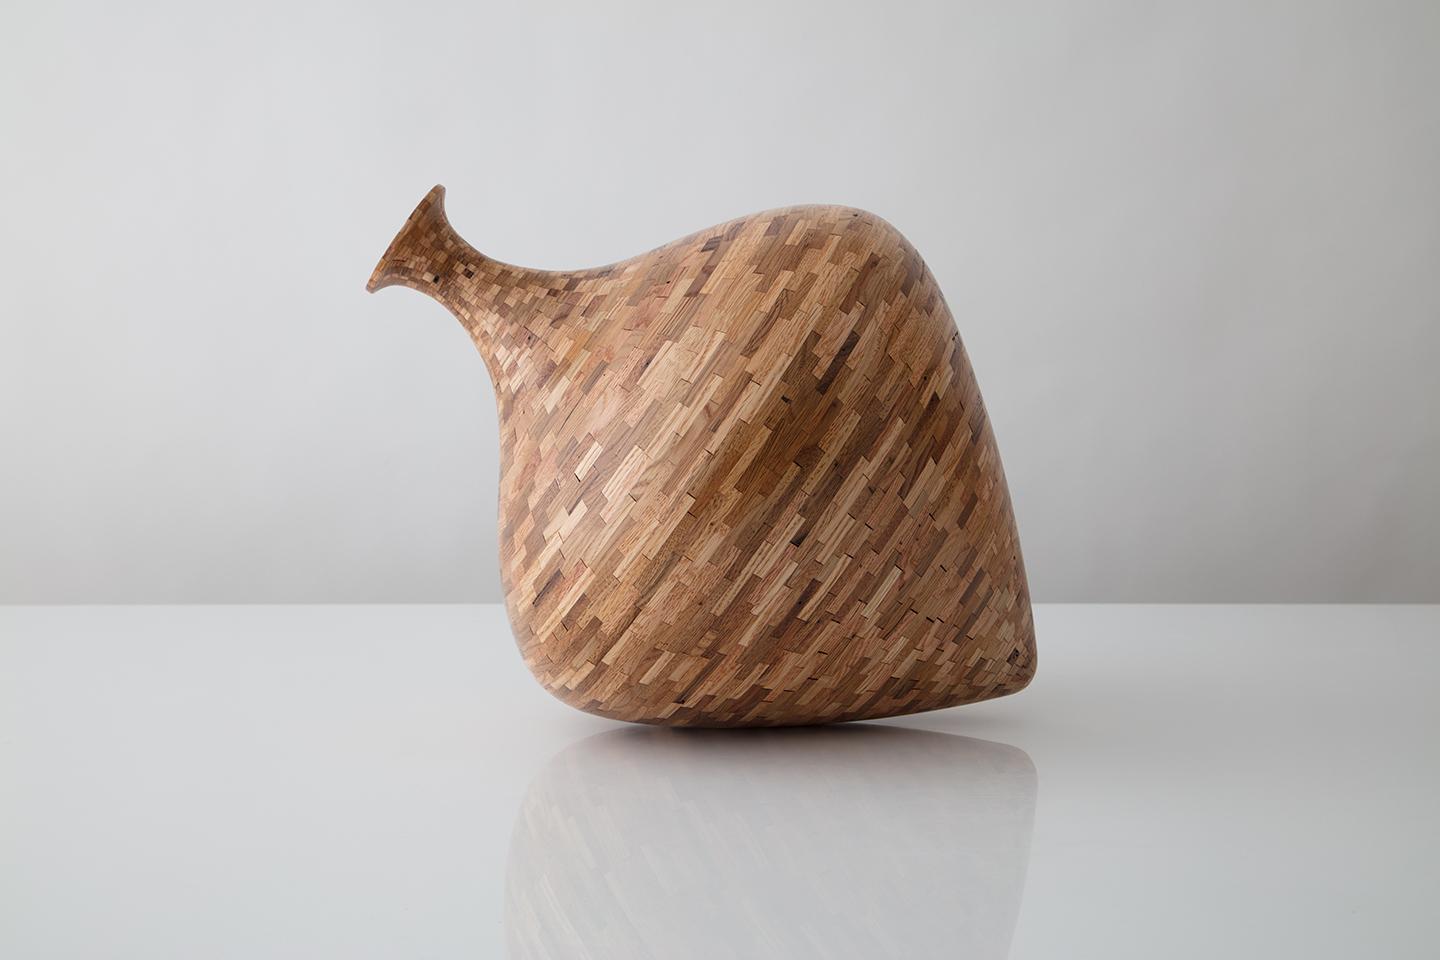 Modern STACKED Oak Vase, by Richard Haining, Wooden Spinning Top, Available Now